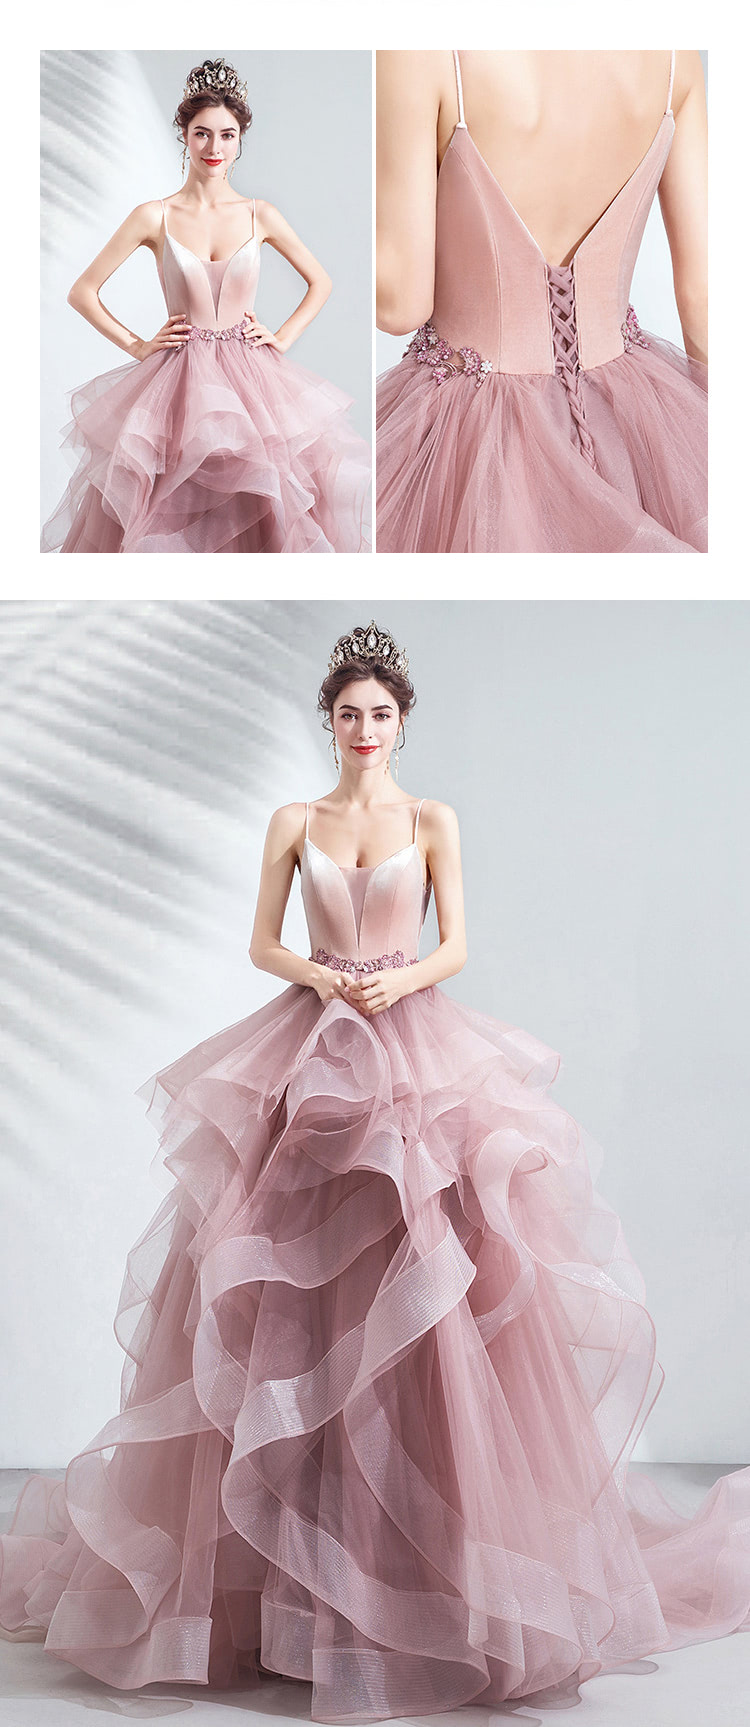 Pink-Layered-Tulle-Banquet-Prom-Party-Evening-Pompon-Skirt-Dress14